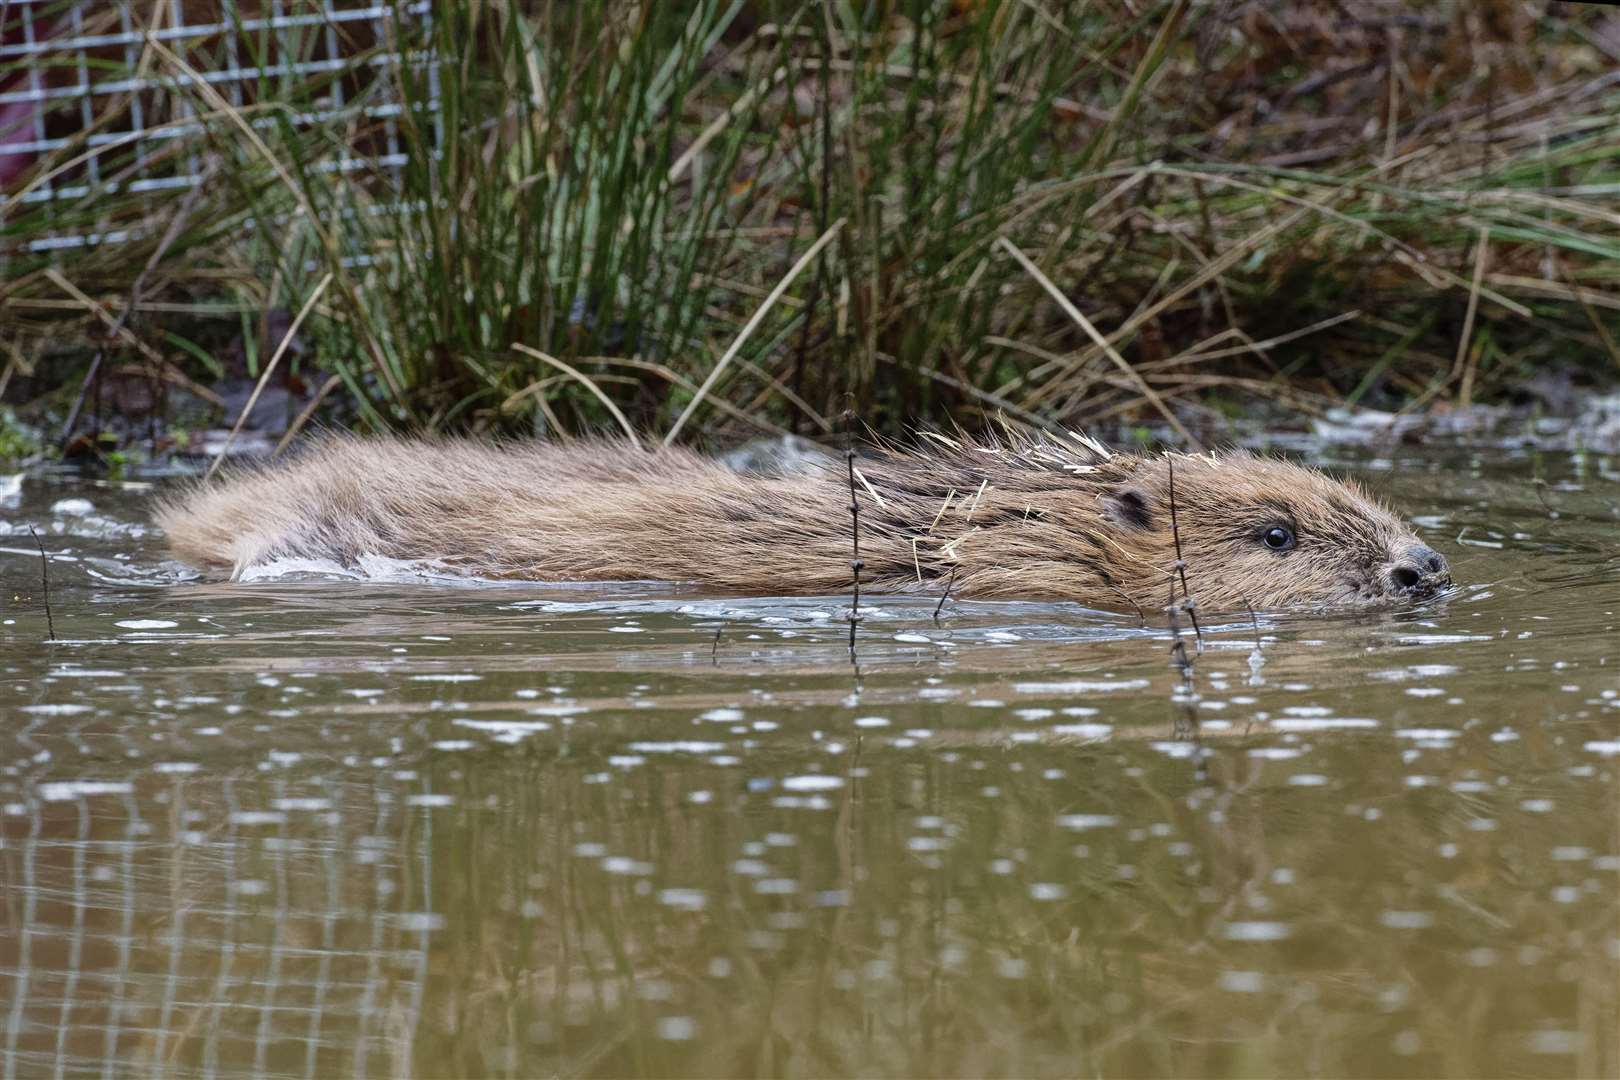 One of the beavers swimming off into the pond (Nick Upton/Ewhurst/PA)